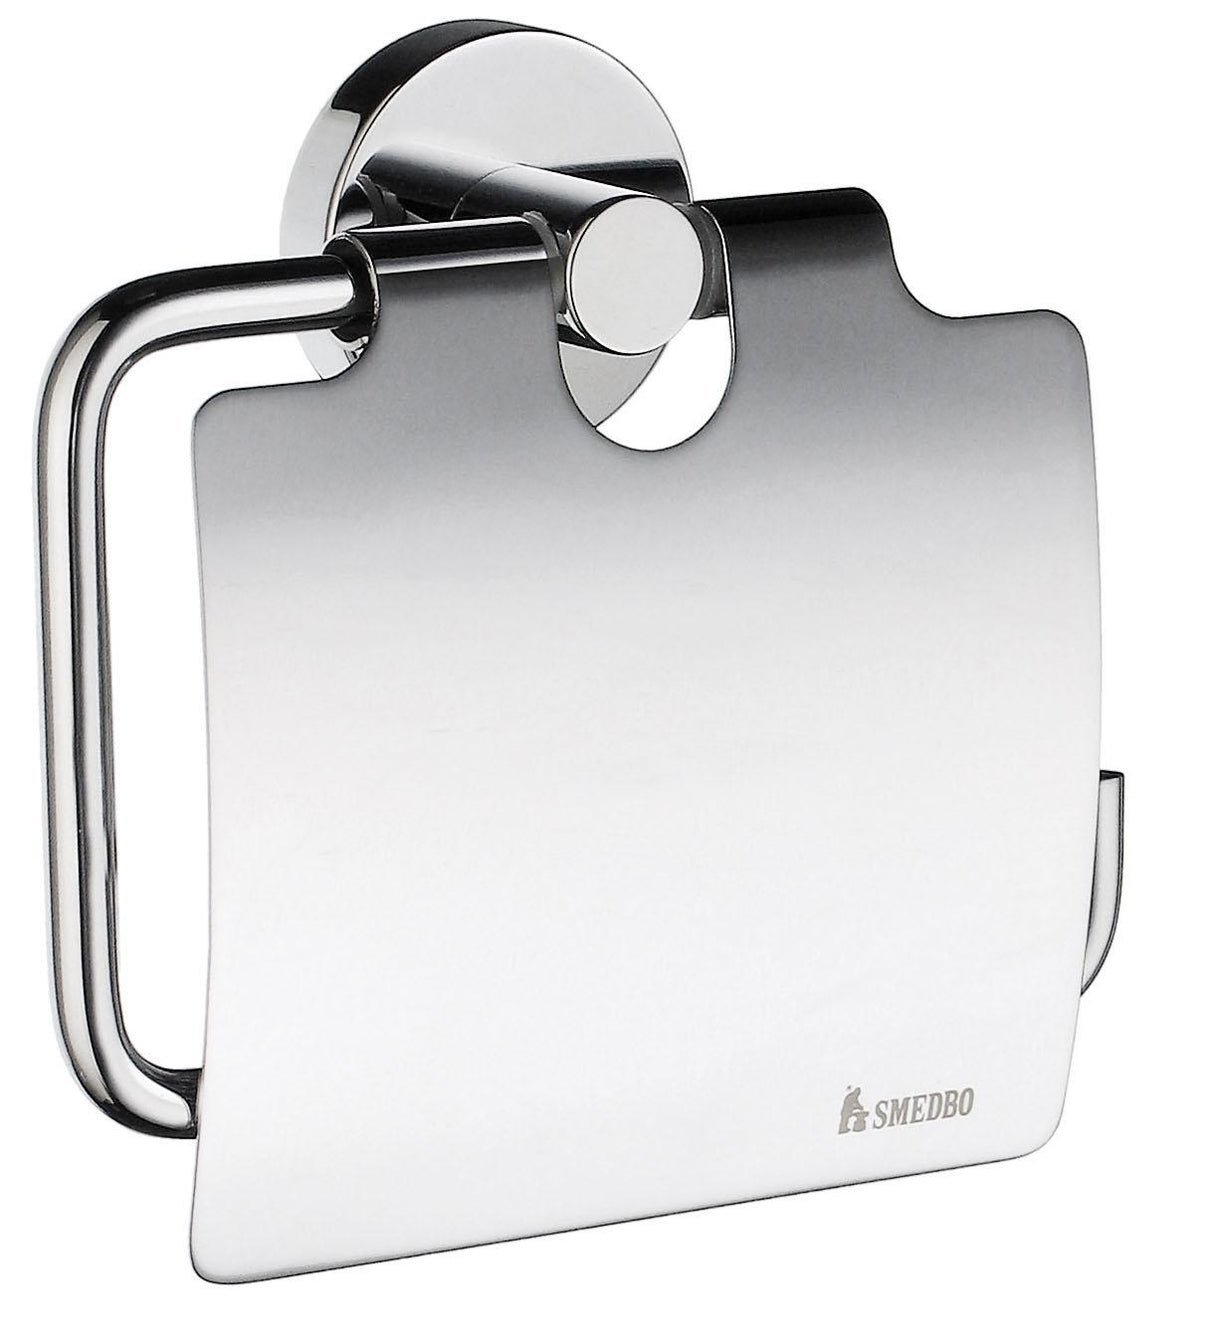 Smedbo Home Toilet Roll Holder with Cover in Polished Chrome